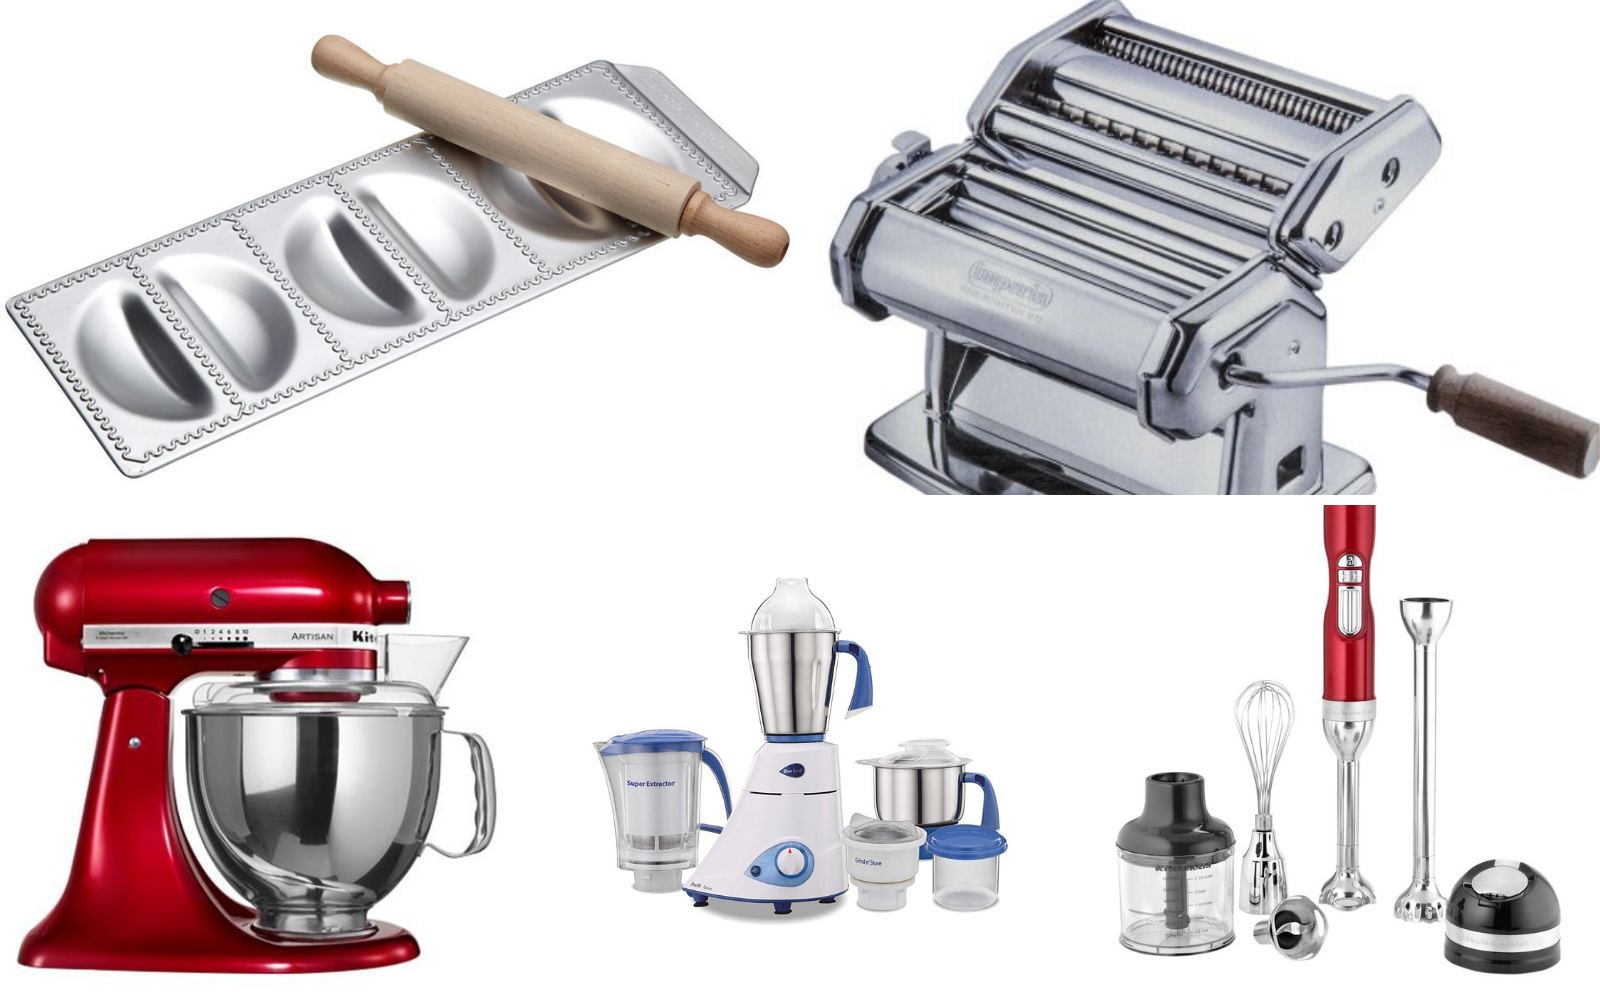 10 Basic Kitchen Appliances Every Home Needs To Have by Archana's